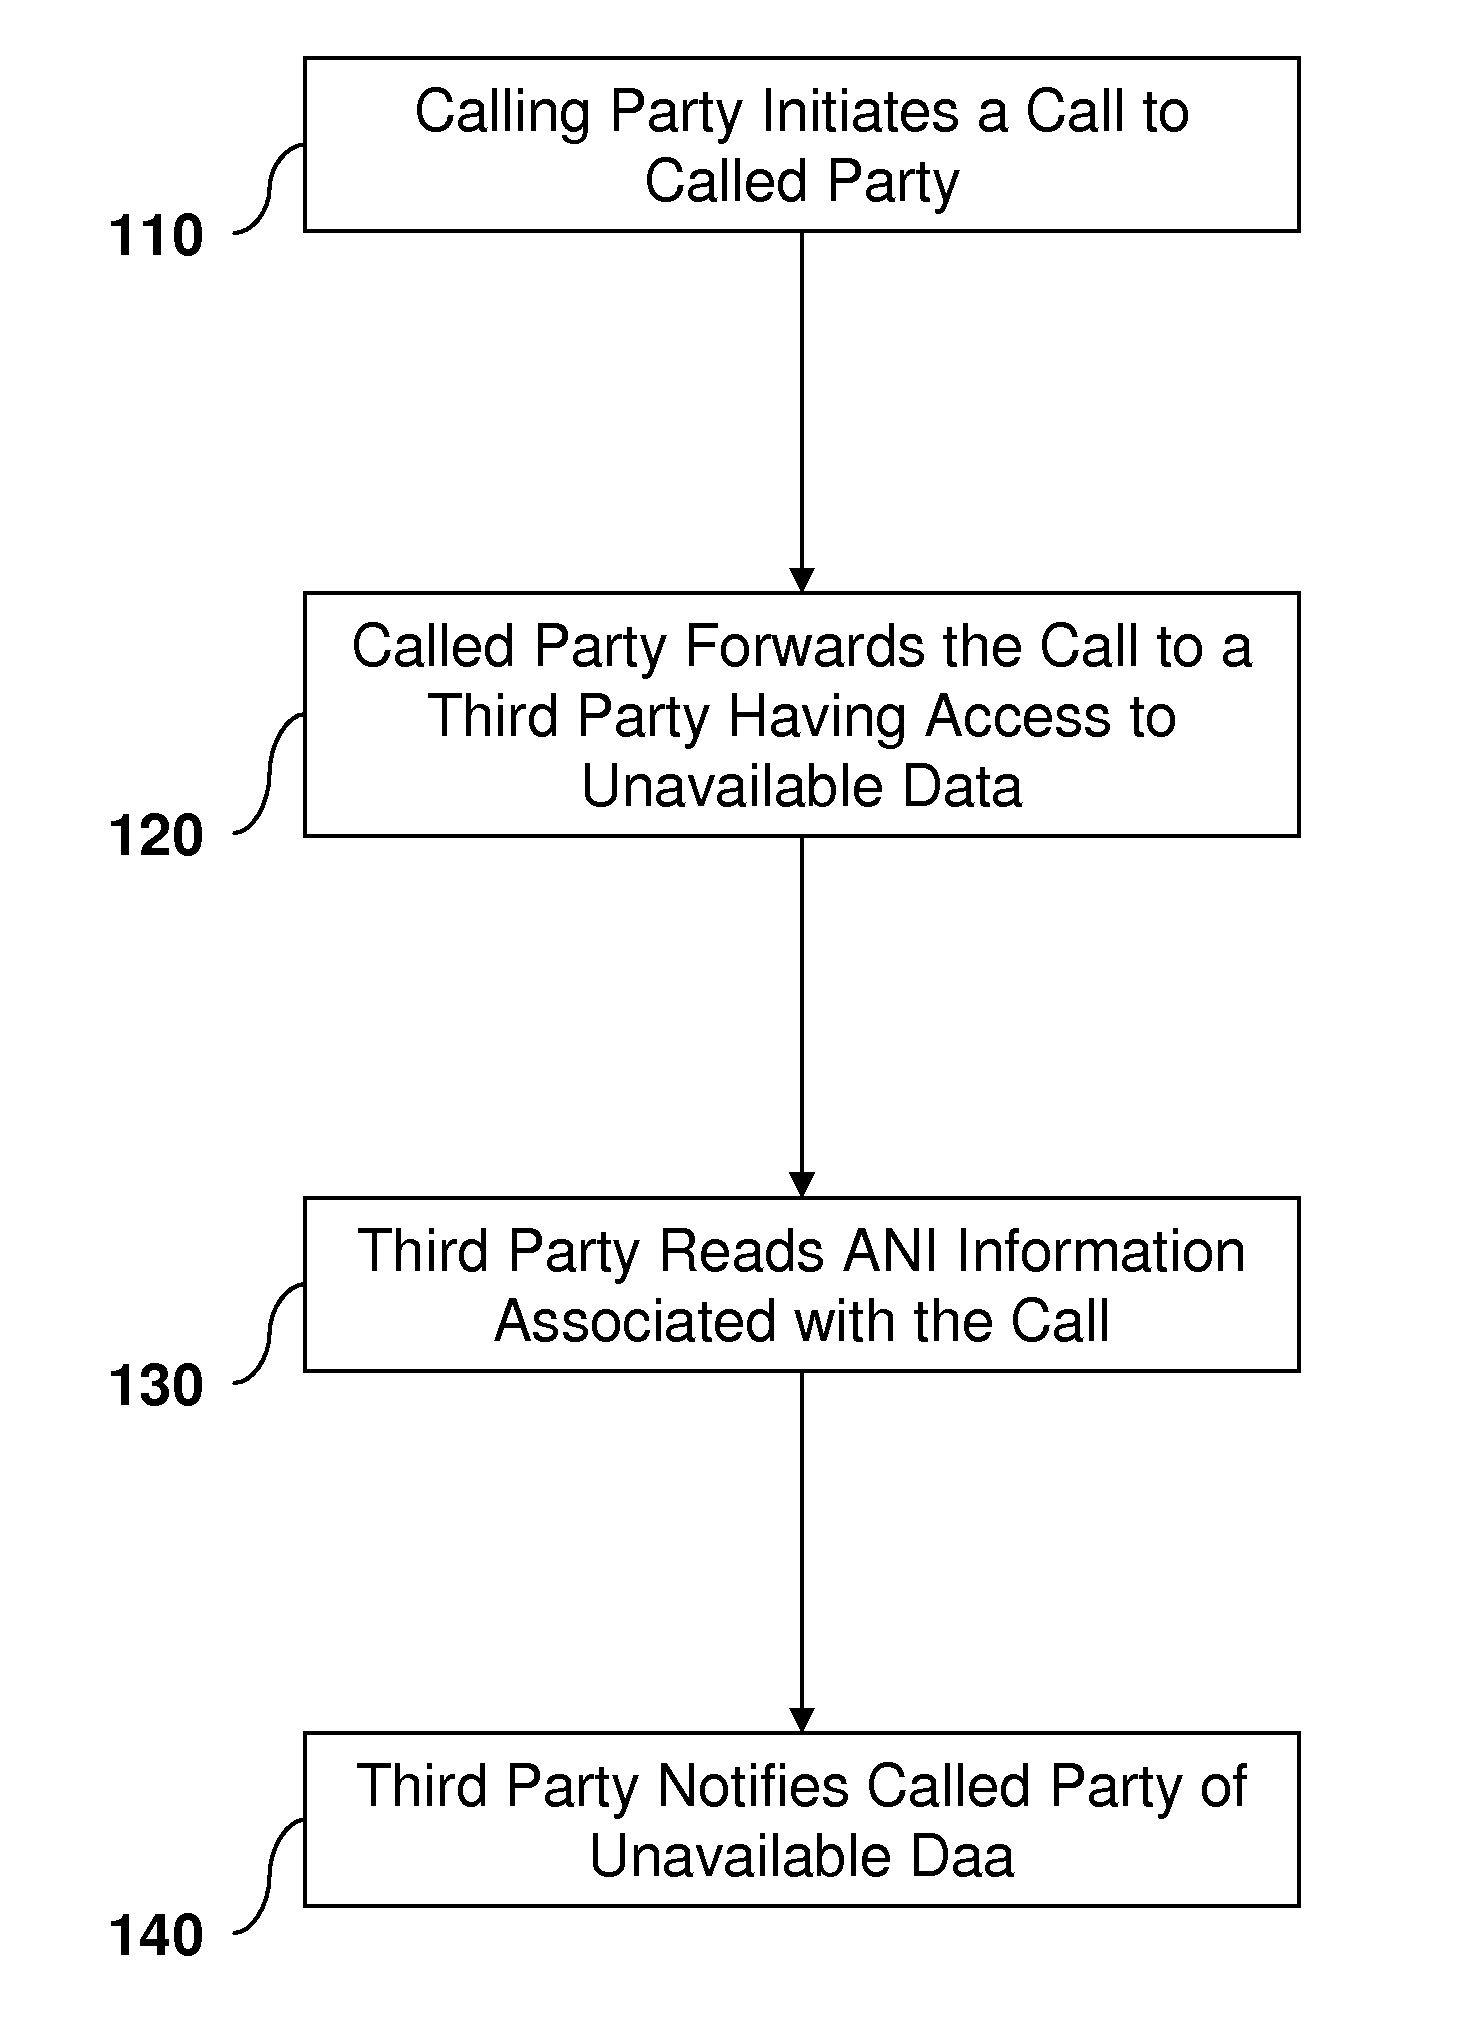 System and Method for Providing Caller Information to a Called Party Utilizing Call Forwarding